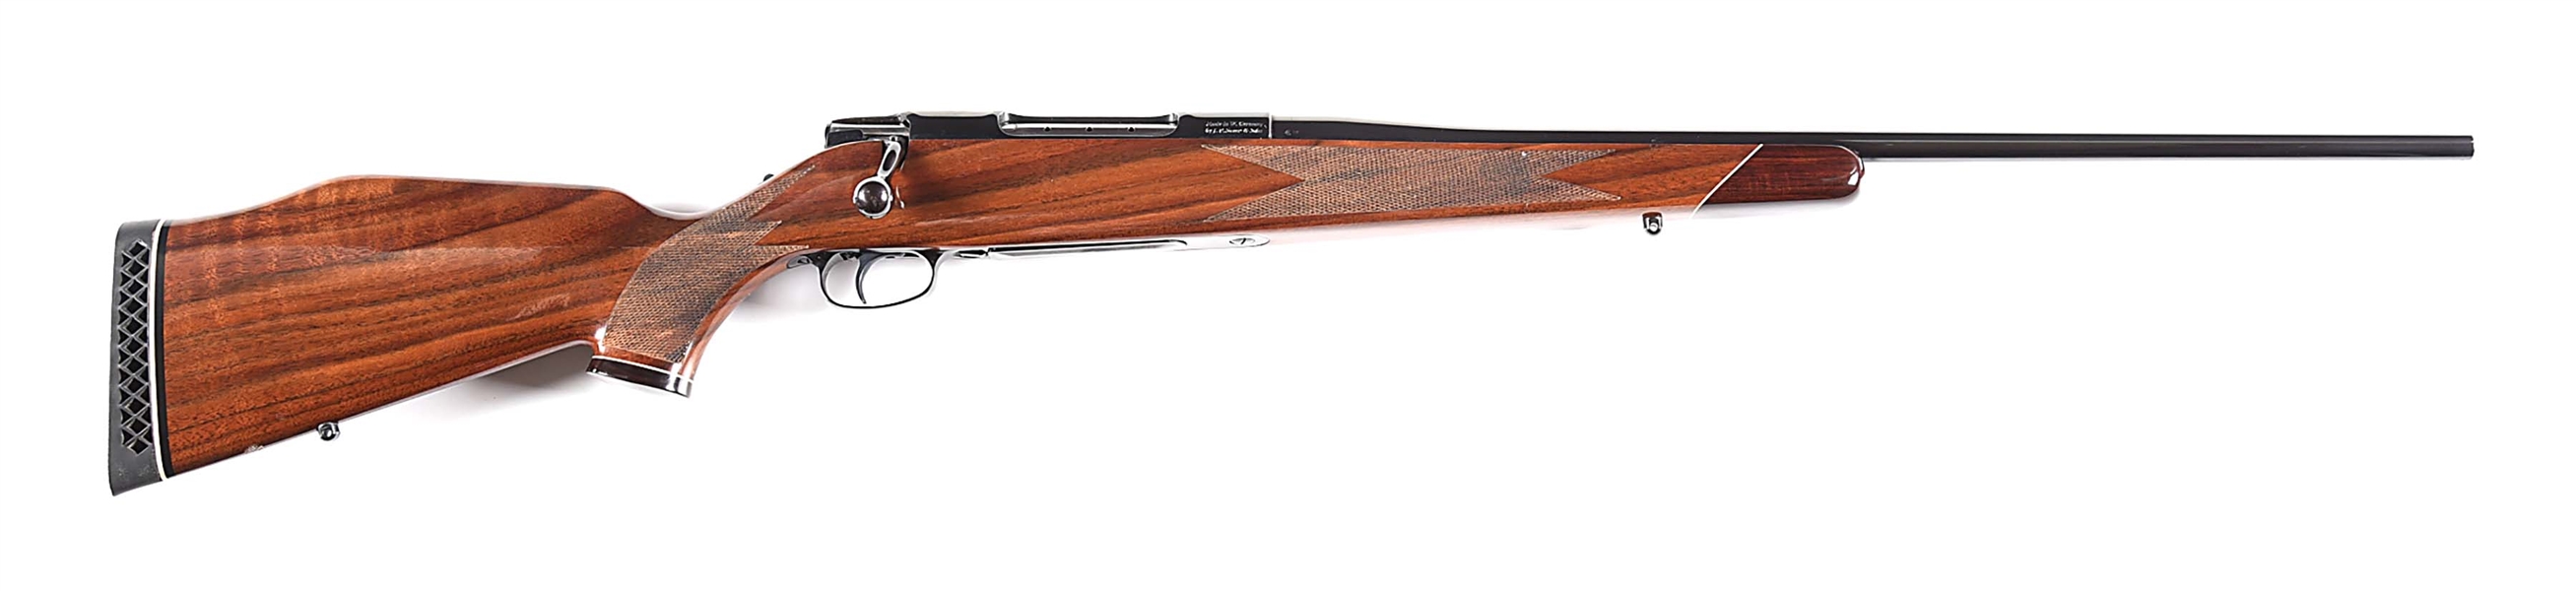 (M) COLT SAUER BOLT ACTION SPORTING RIFLE IN .30-06 SPRINGFIELD.